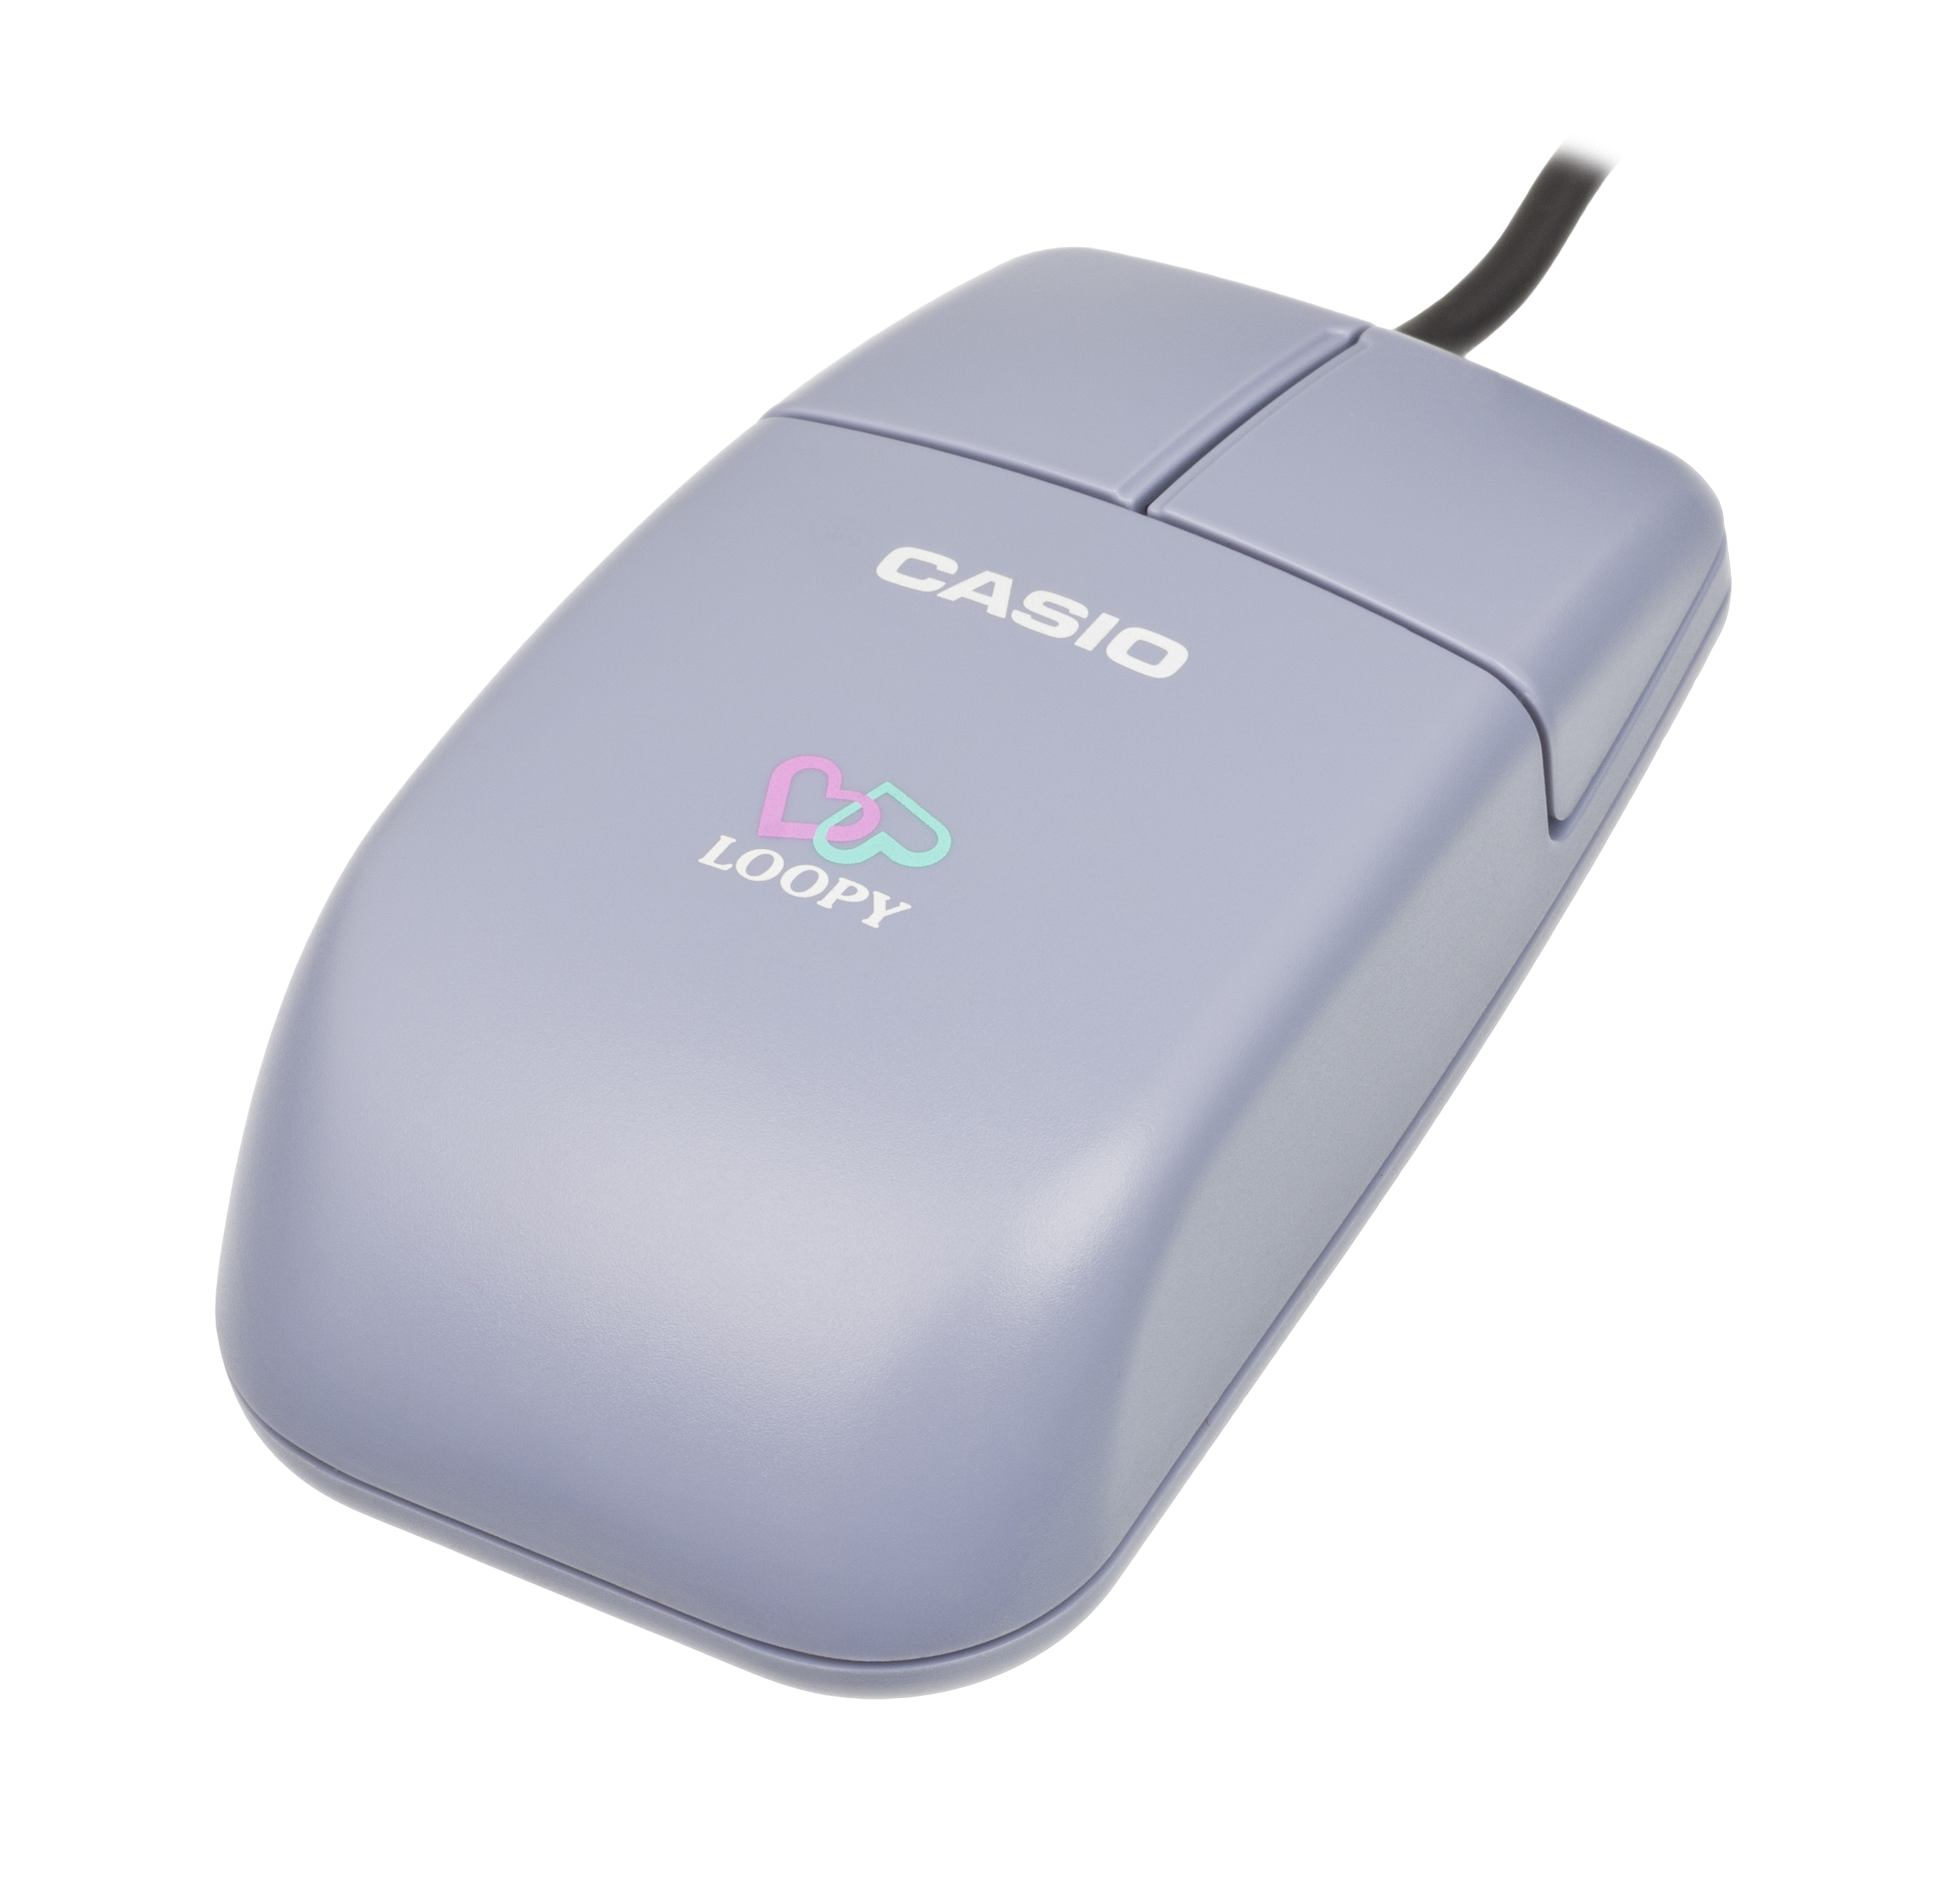 Casio-Loopy-Mouse